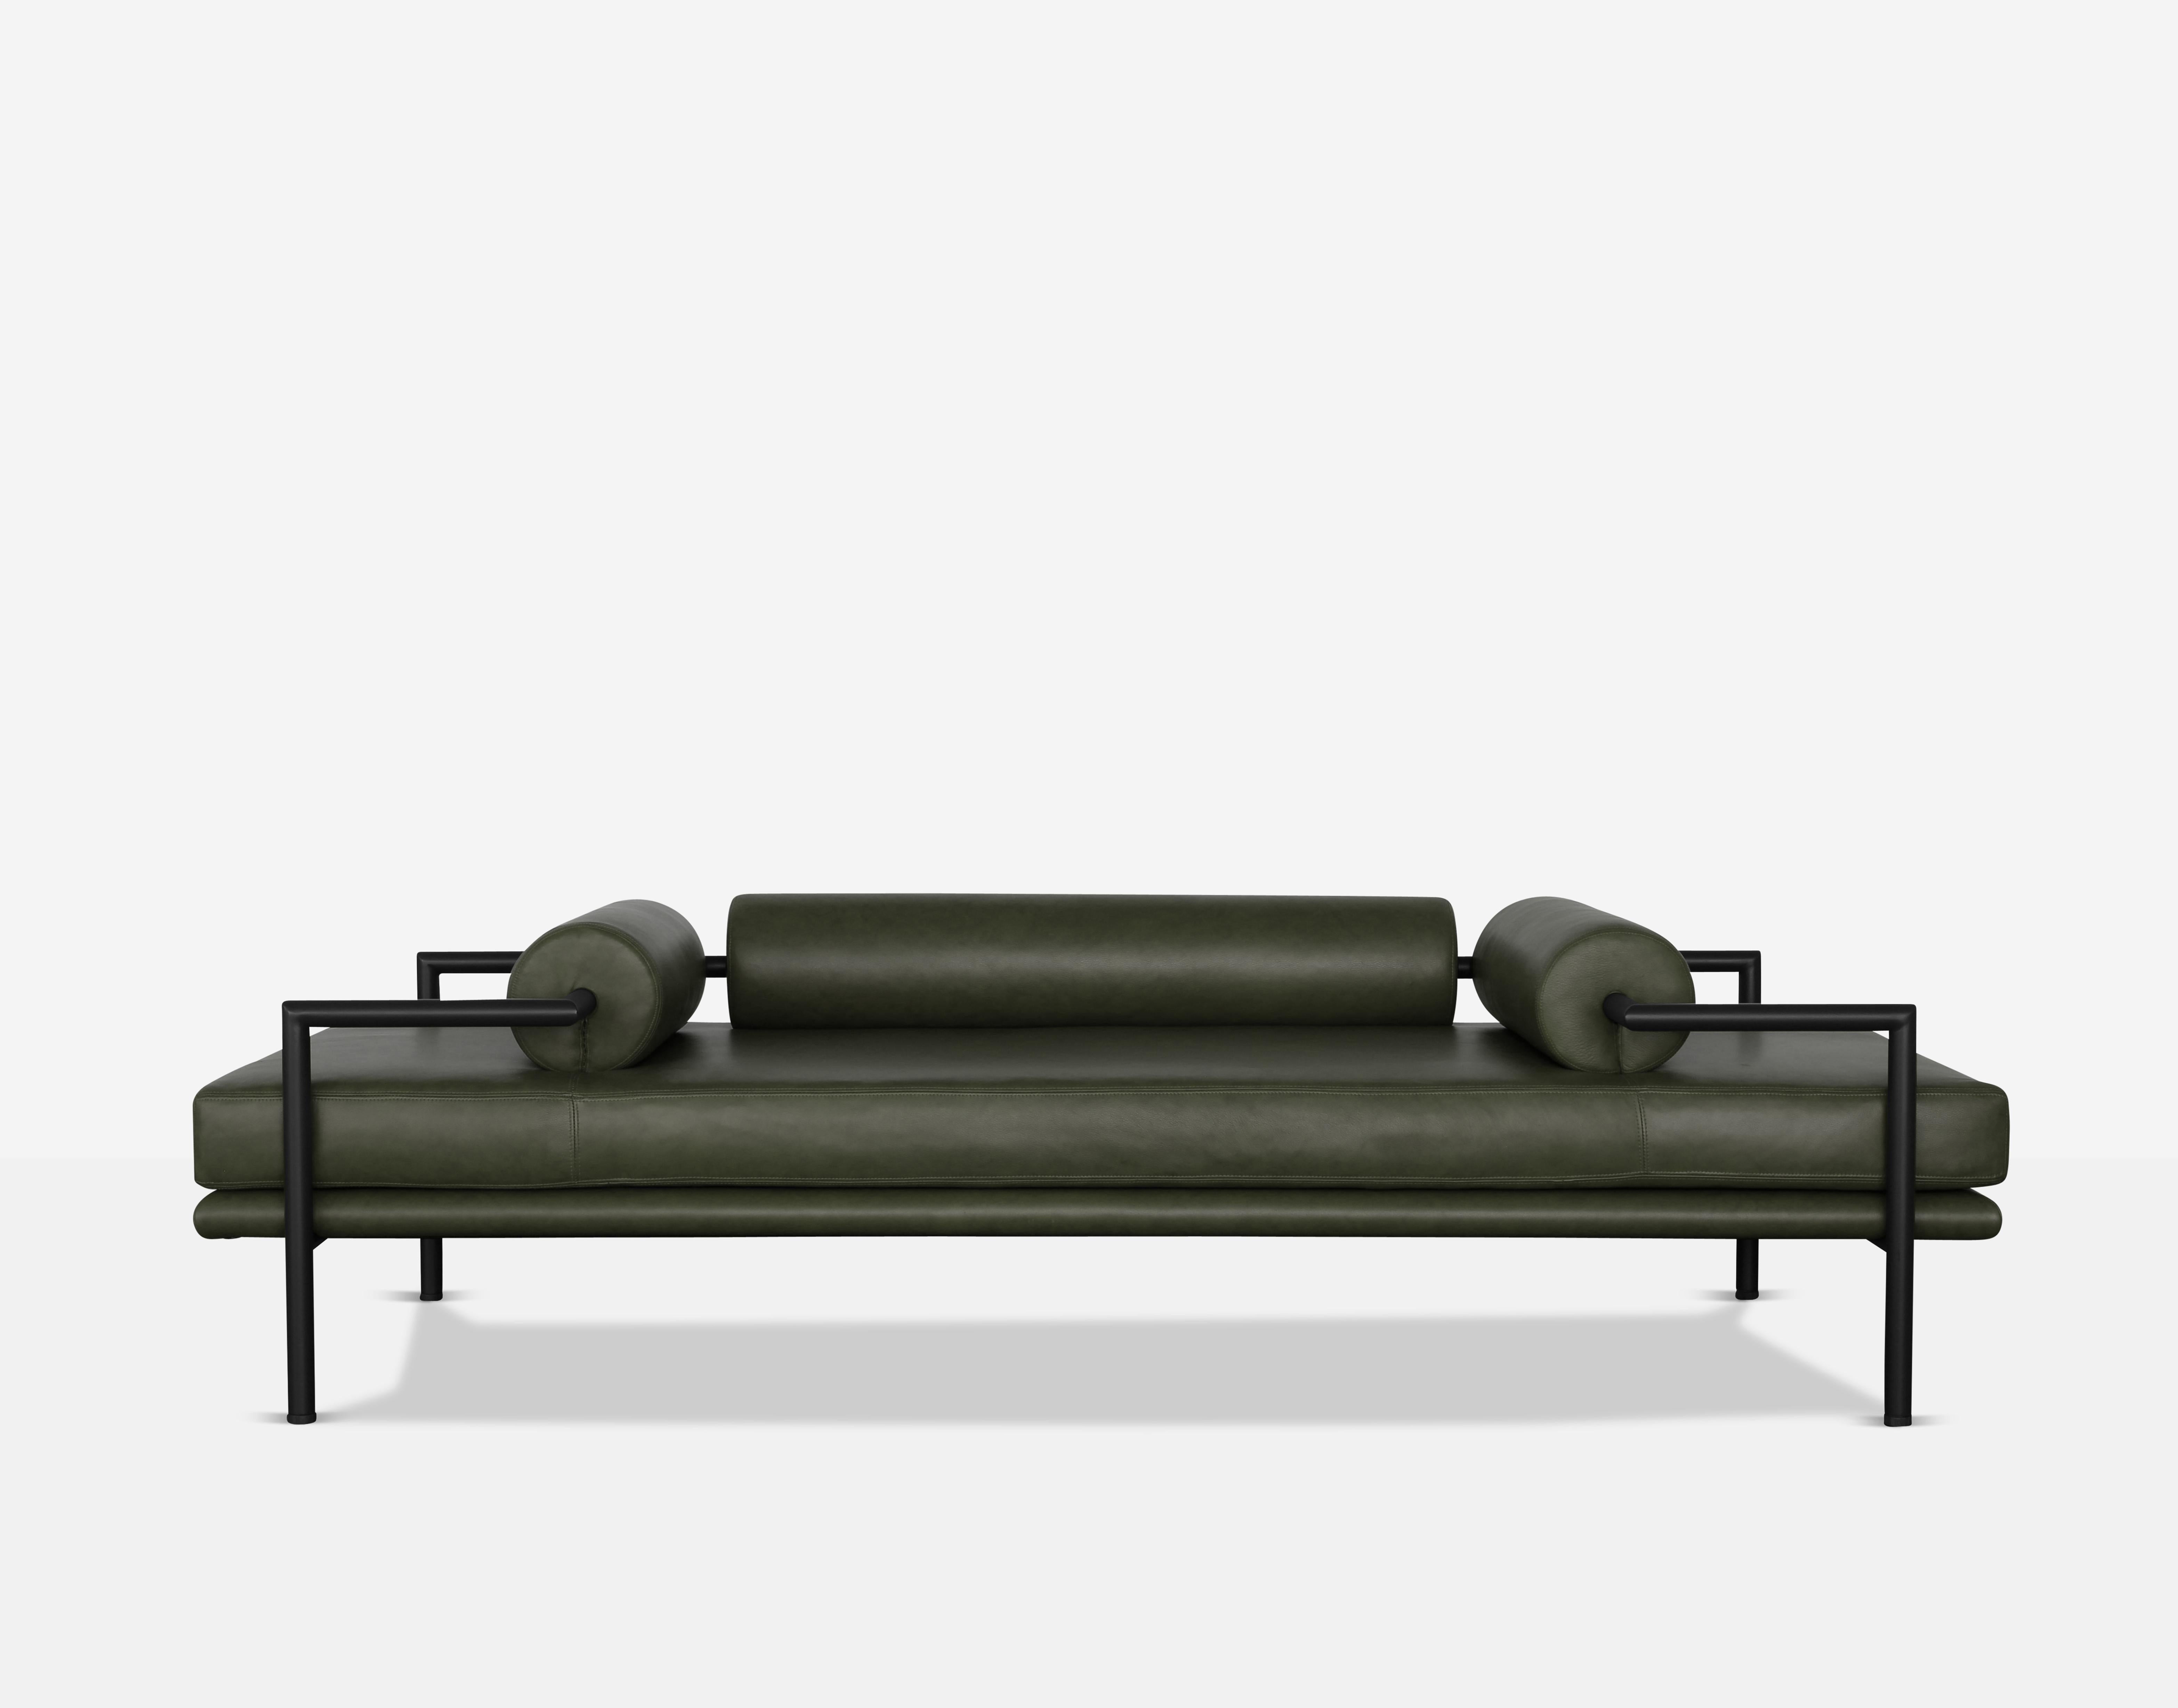 American Dorcia Daybed with Matte Black frame and textile by LUTECA